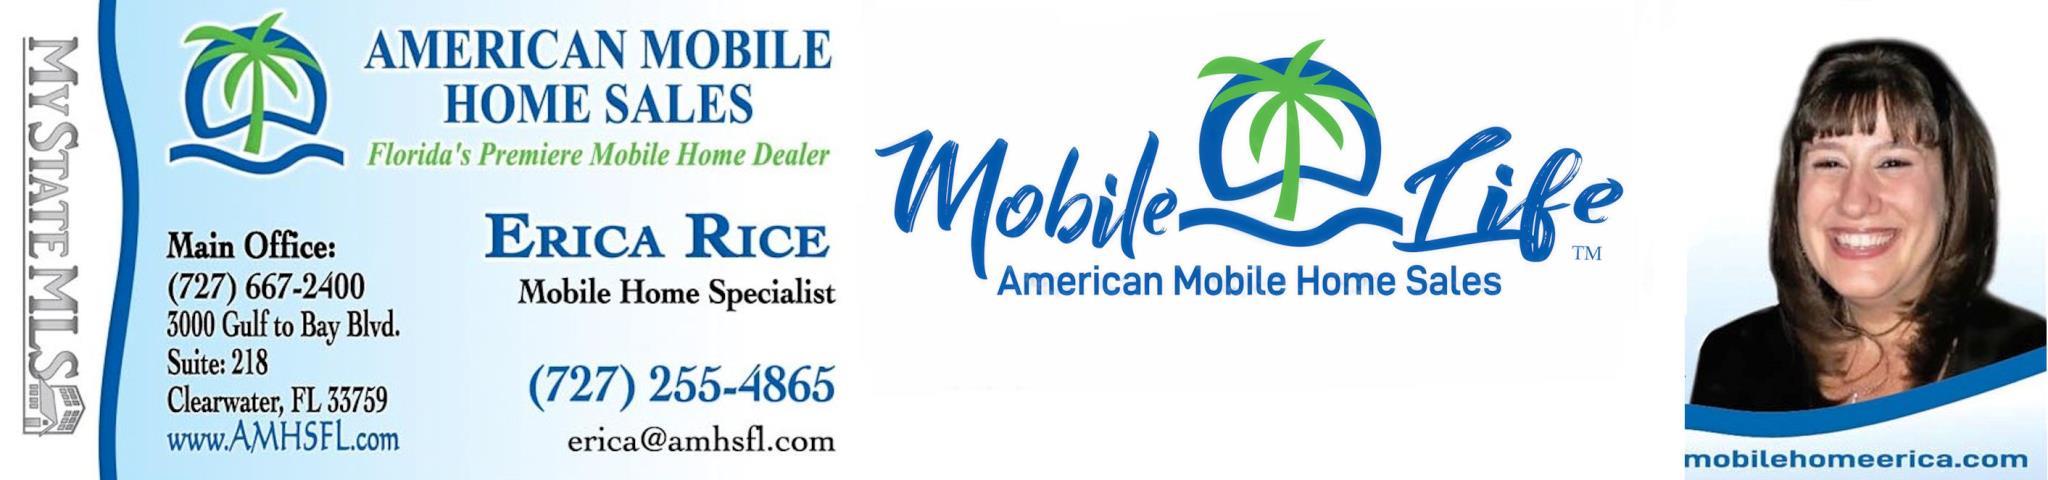 American Mobile Home Sales of Florida